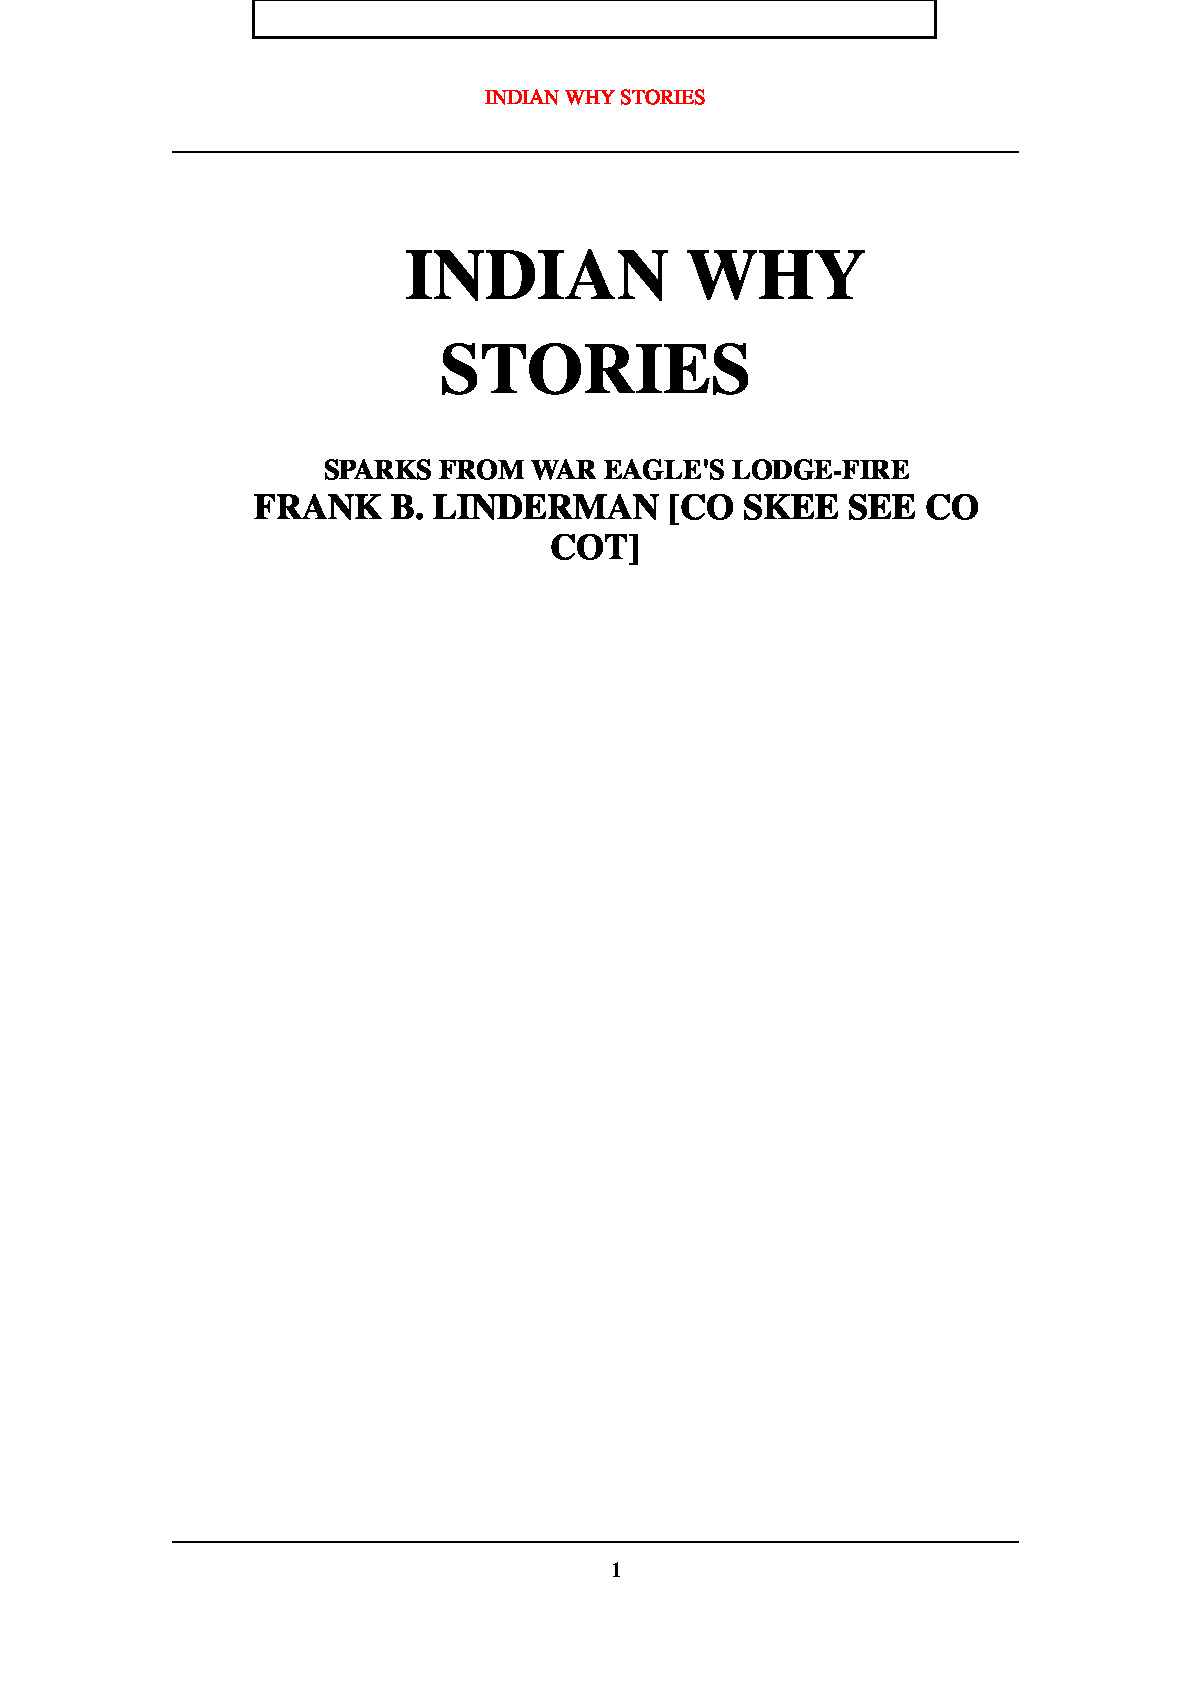 INDIAN_WHY_STORIES(印第安故事案)